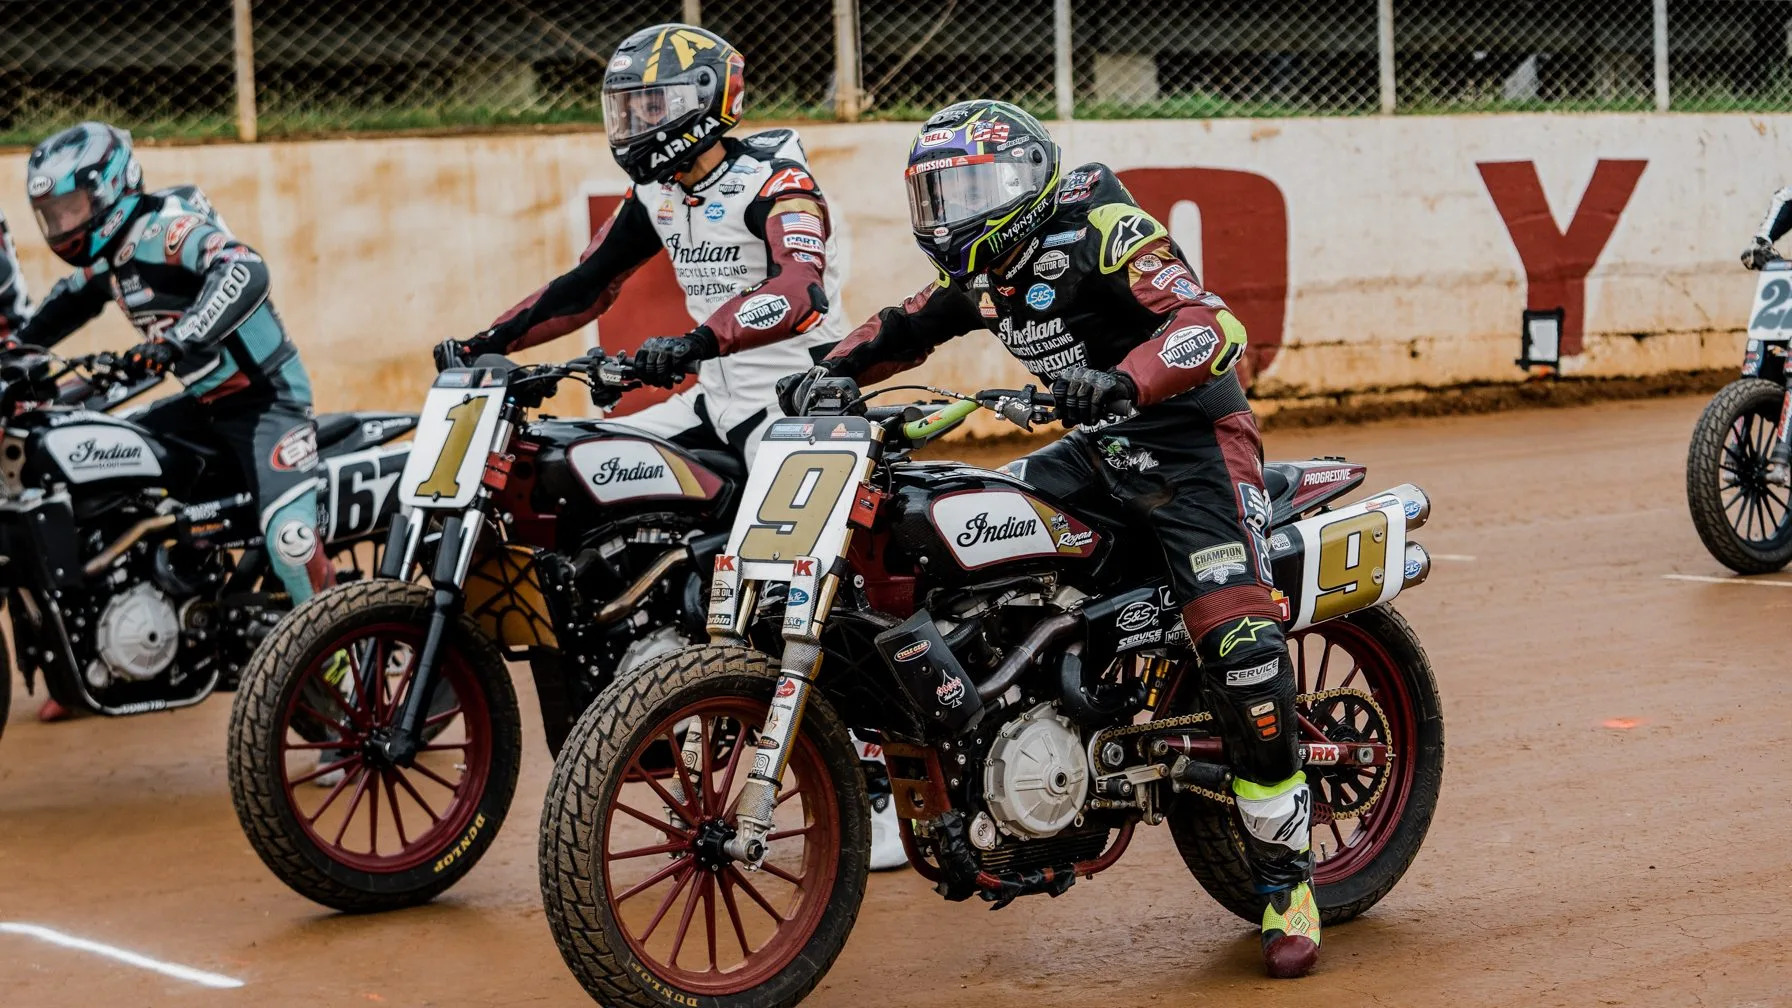 A view of Jared Mees and Briar Bauman ready to battle for the AFT trophy